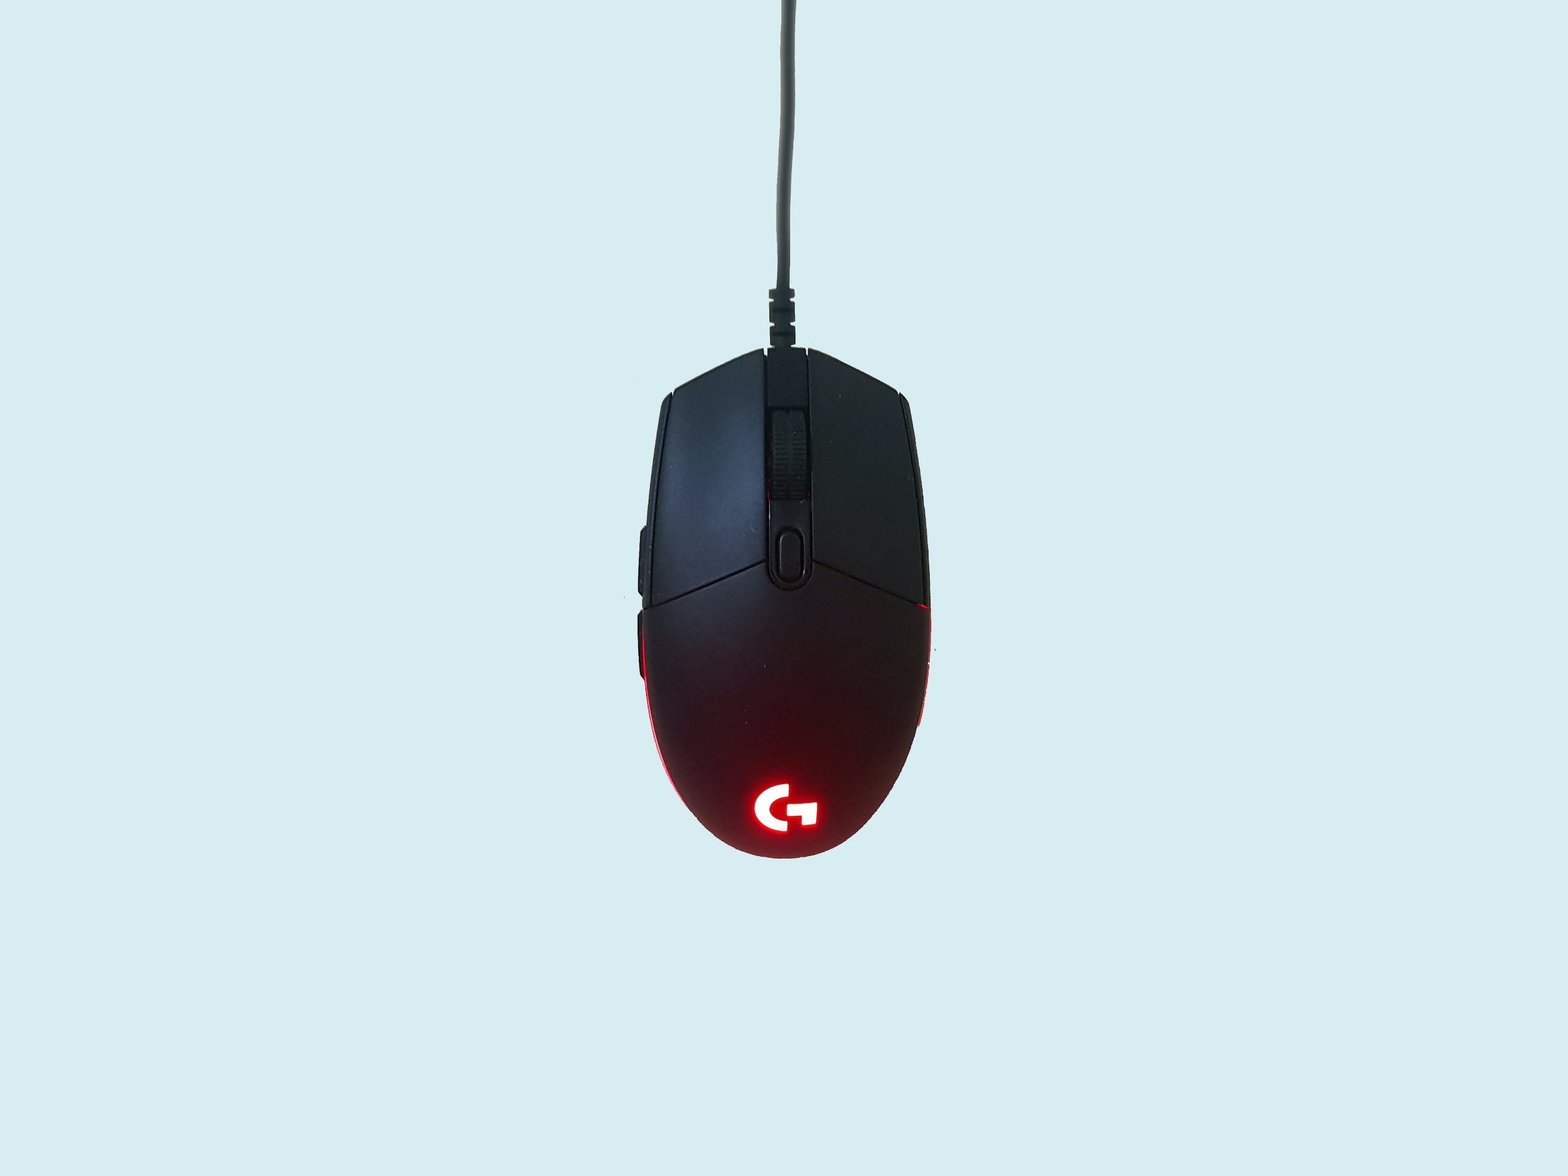 Gaming Mouse Double-Click - Troubleshooting and Fixes for Gaming Mouse Issues